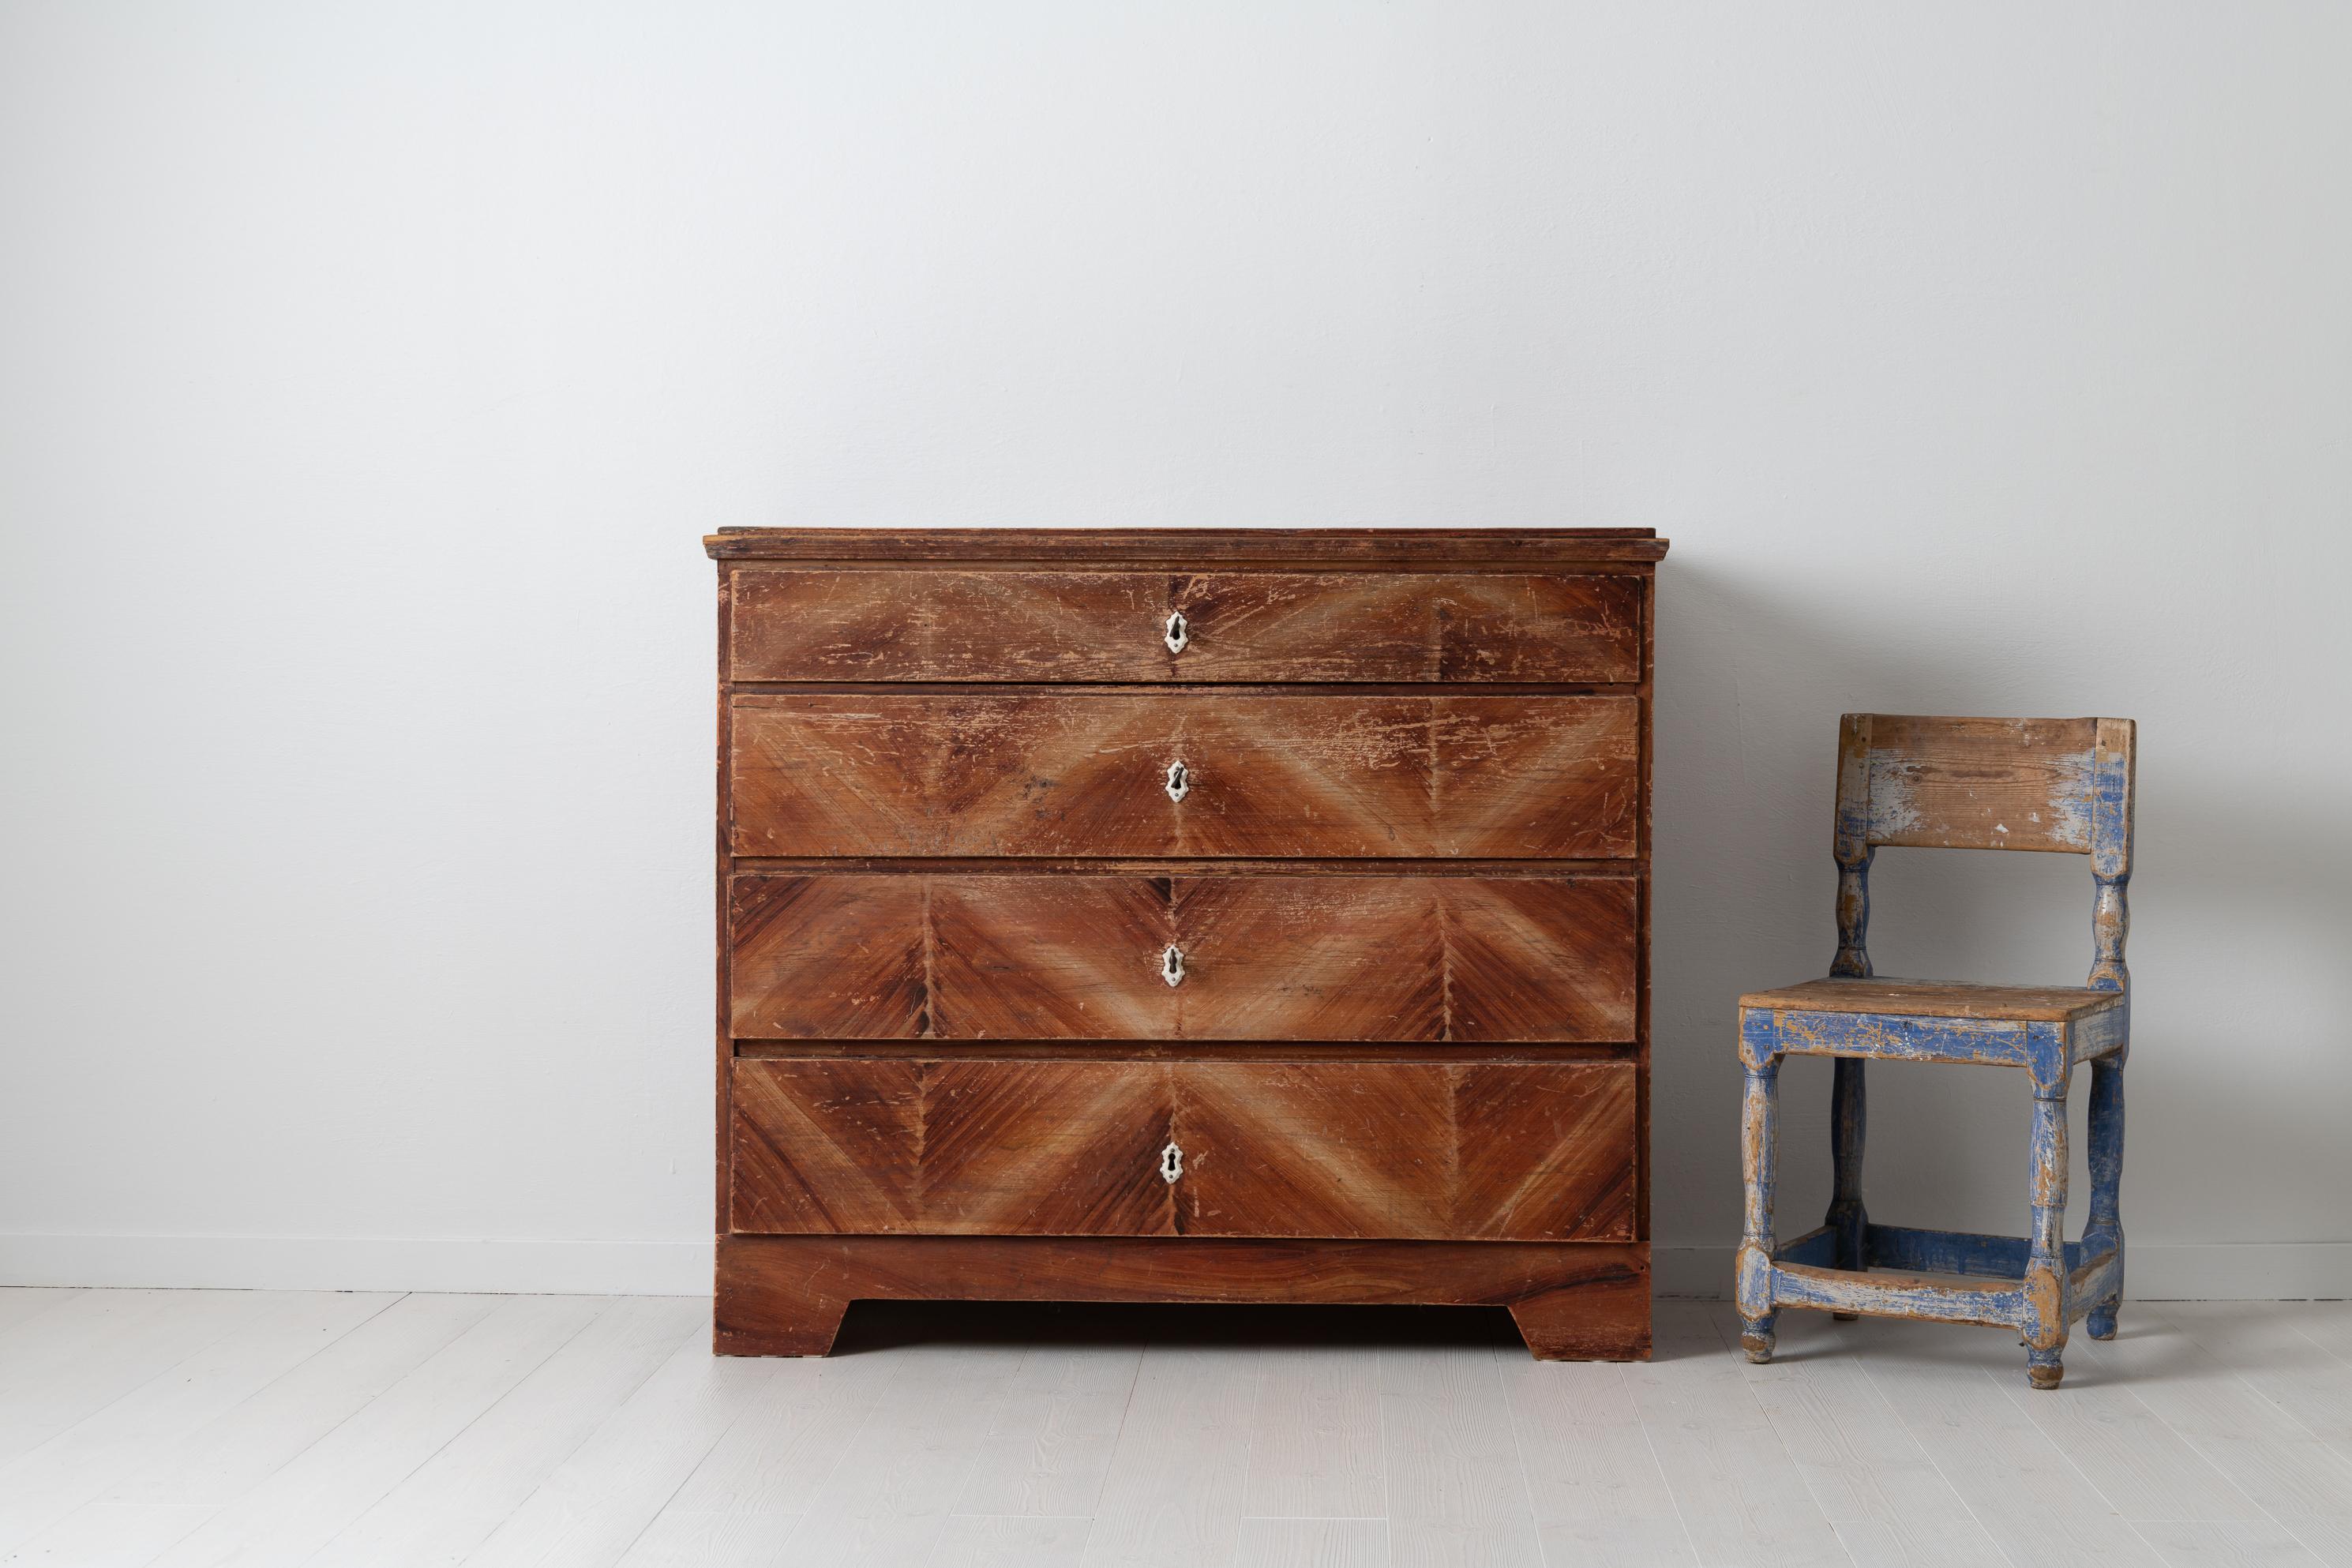 Chest of drawers in folk art. The chest is from northern Sweden and made in pine during the mid-1800s. Four drawers with original locks and key in working condition. The chest has unusual decorative paint on the drawers, almost a geometric pattern.